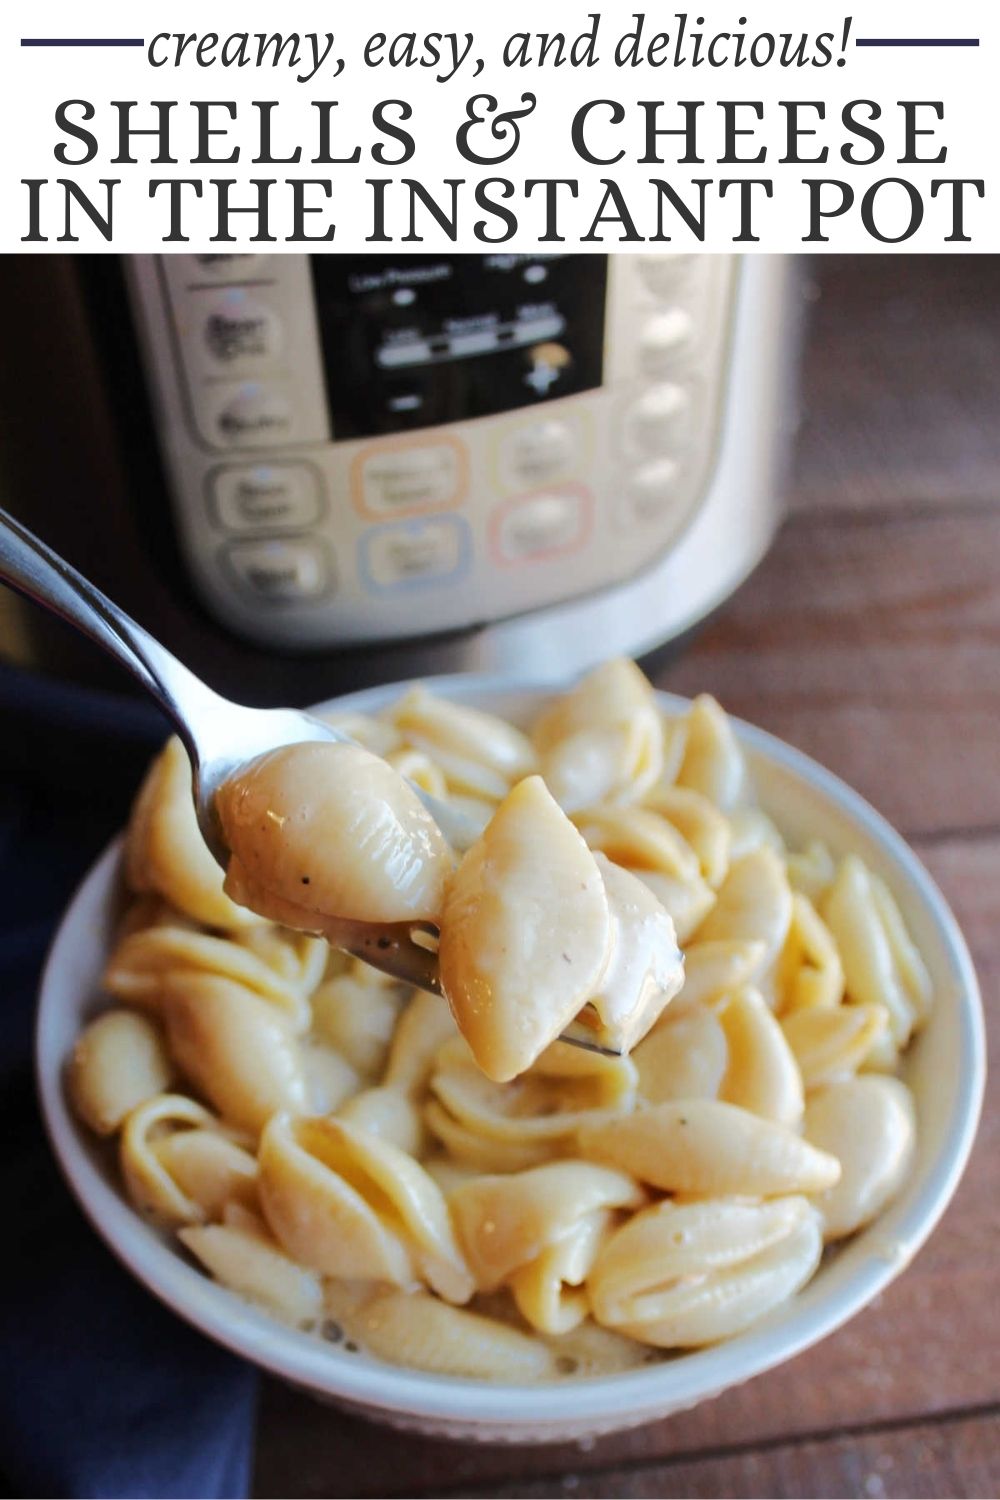 If you like your macaroni and cheese super cheesy and over the top creamy, this is the recipe for you. It’s inspired by the boxed shells and cheese and is made easily in the instant pot.